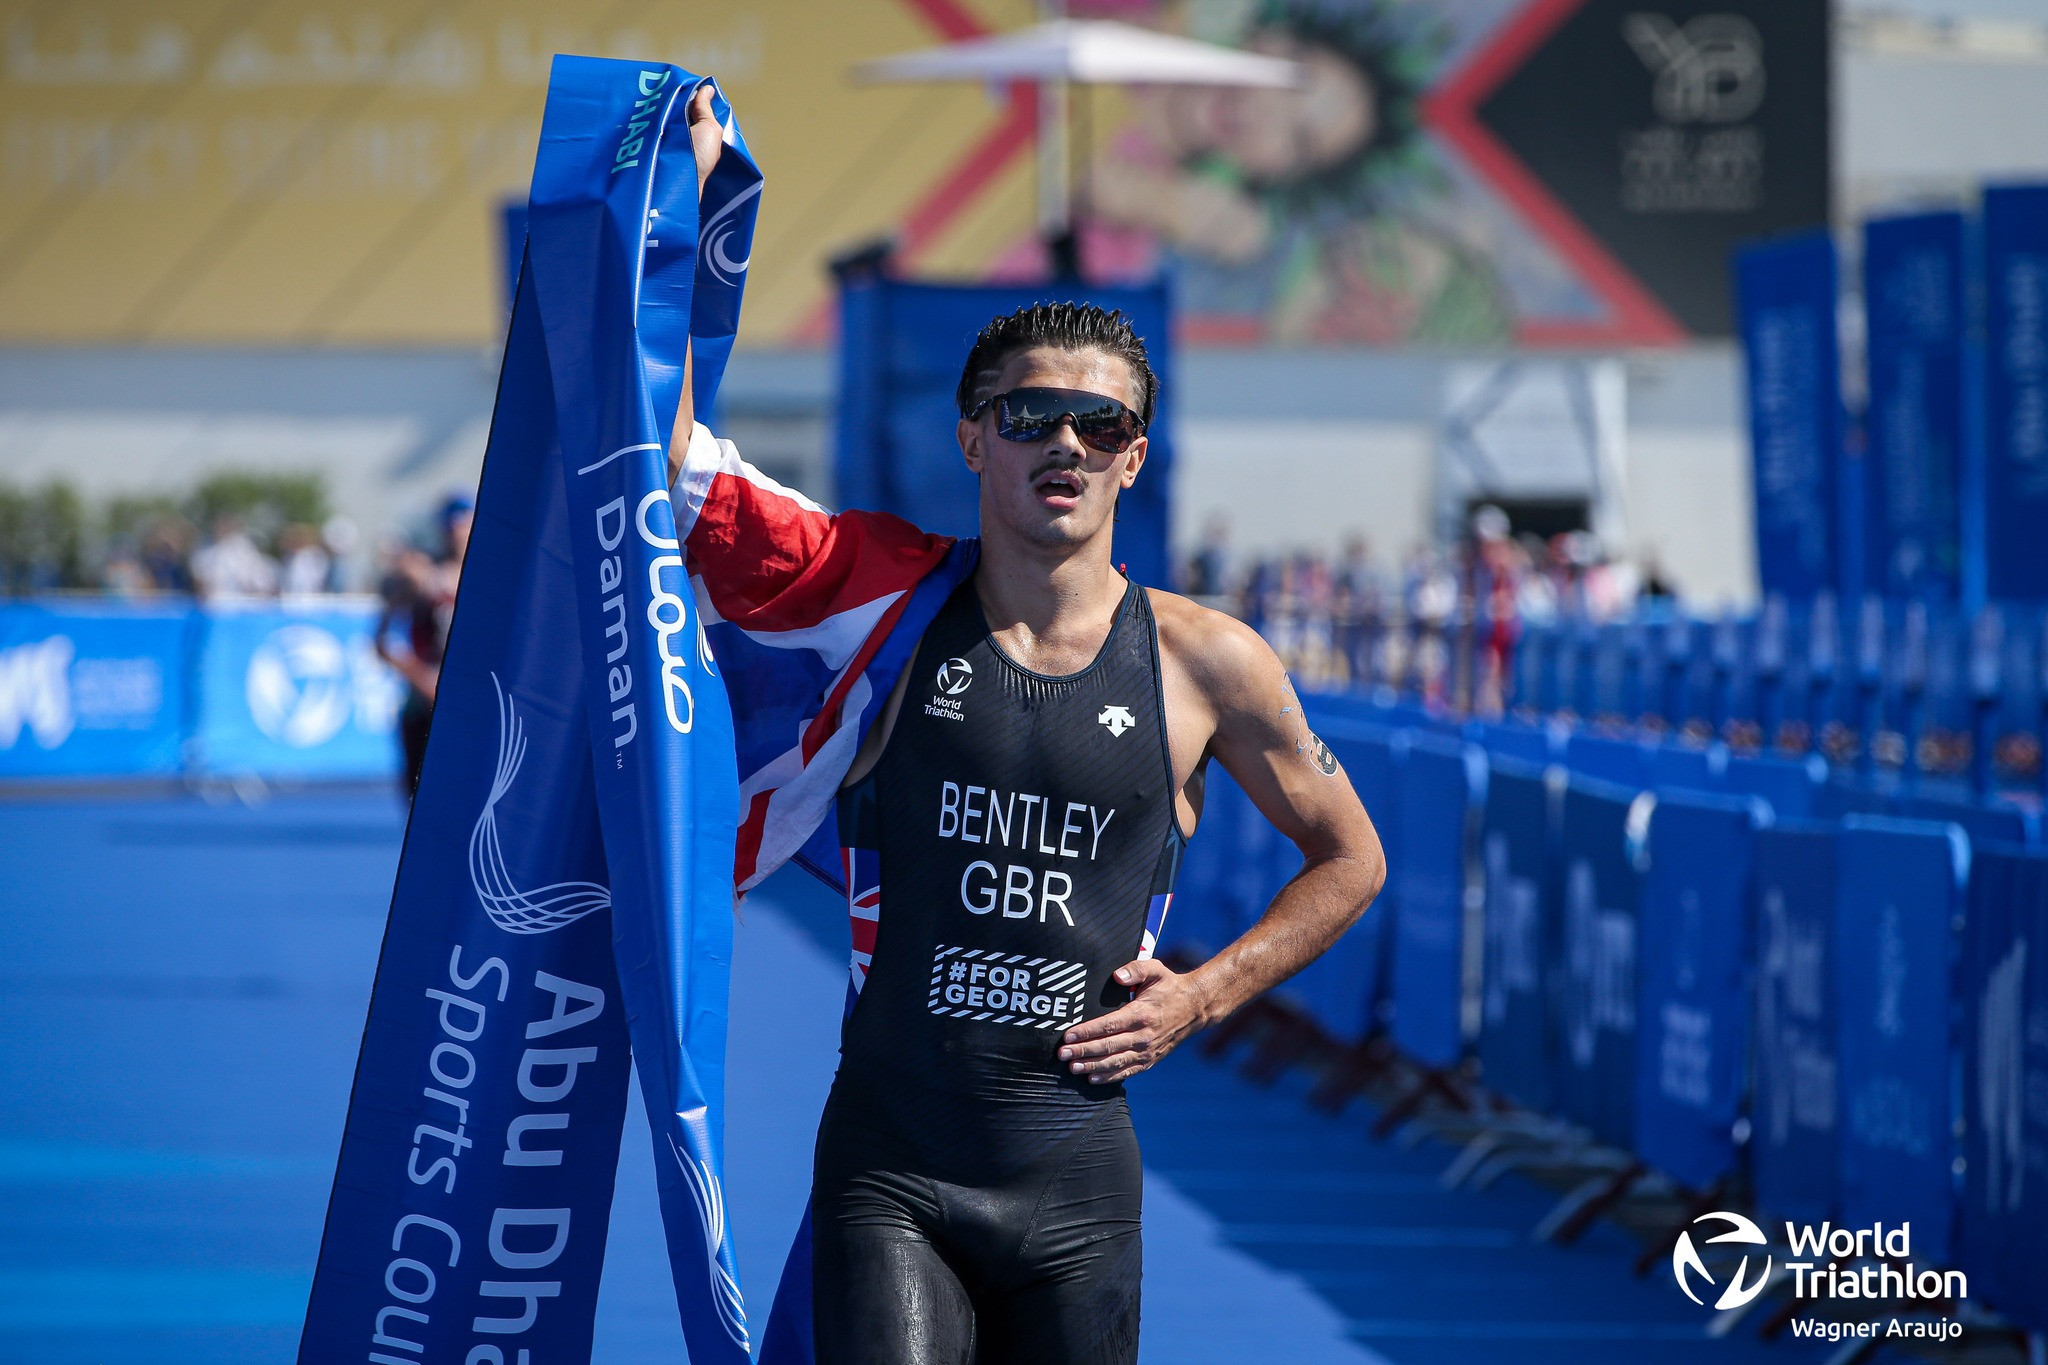 Britain's Connor Bentley produced a superb attack in the men's under-23 race to drive clear of his challengers ©World Triathlon